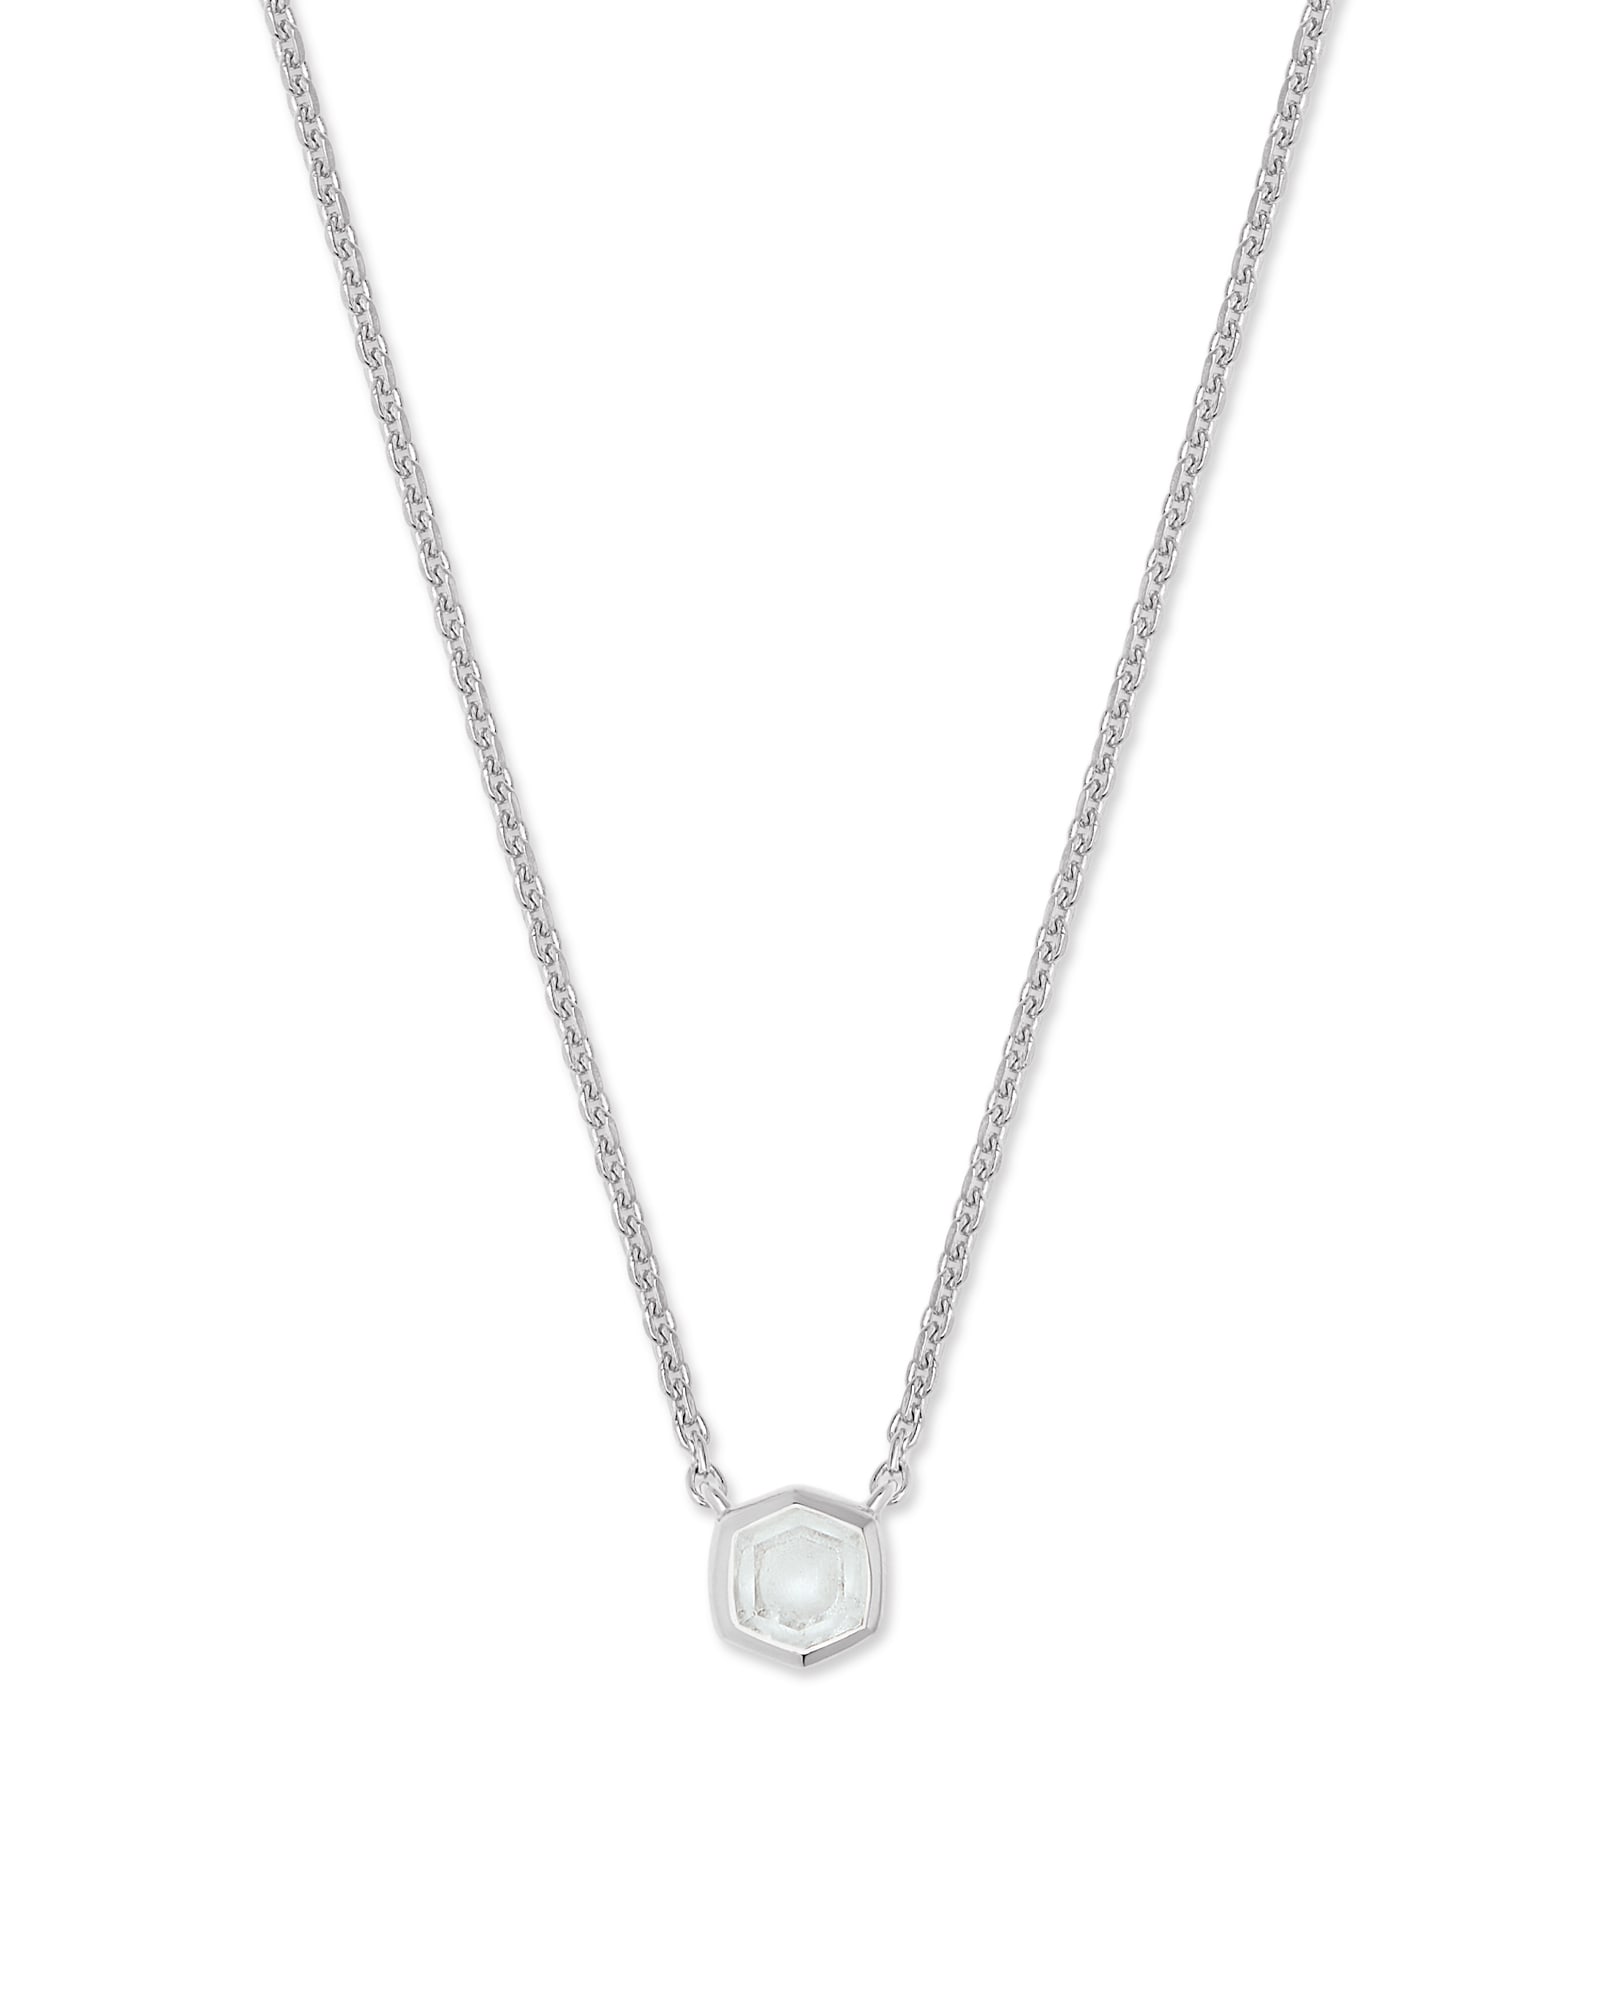 Davie Sterling Silver Pendant Necklace in Rock Crystal